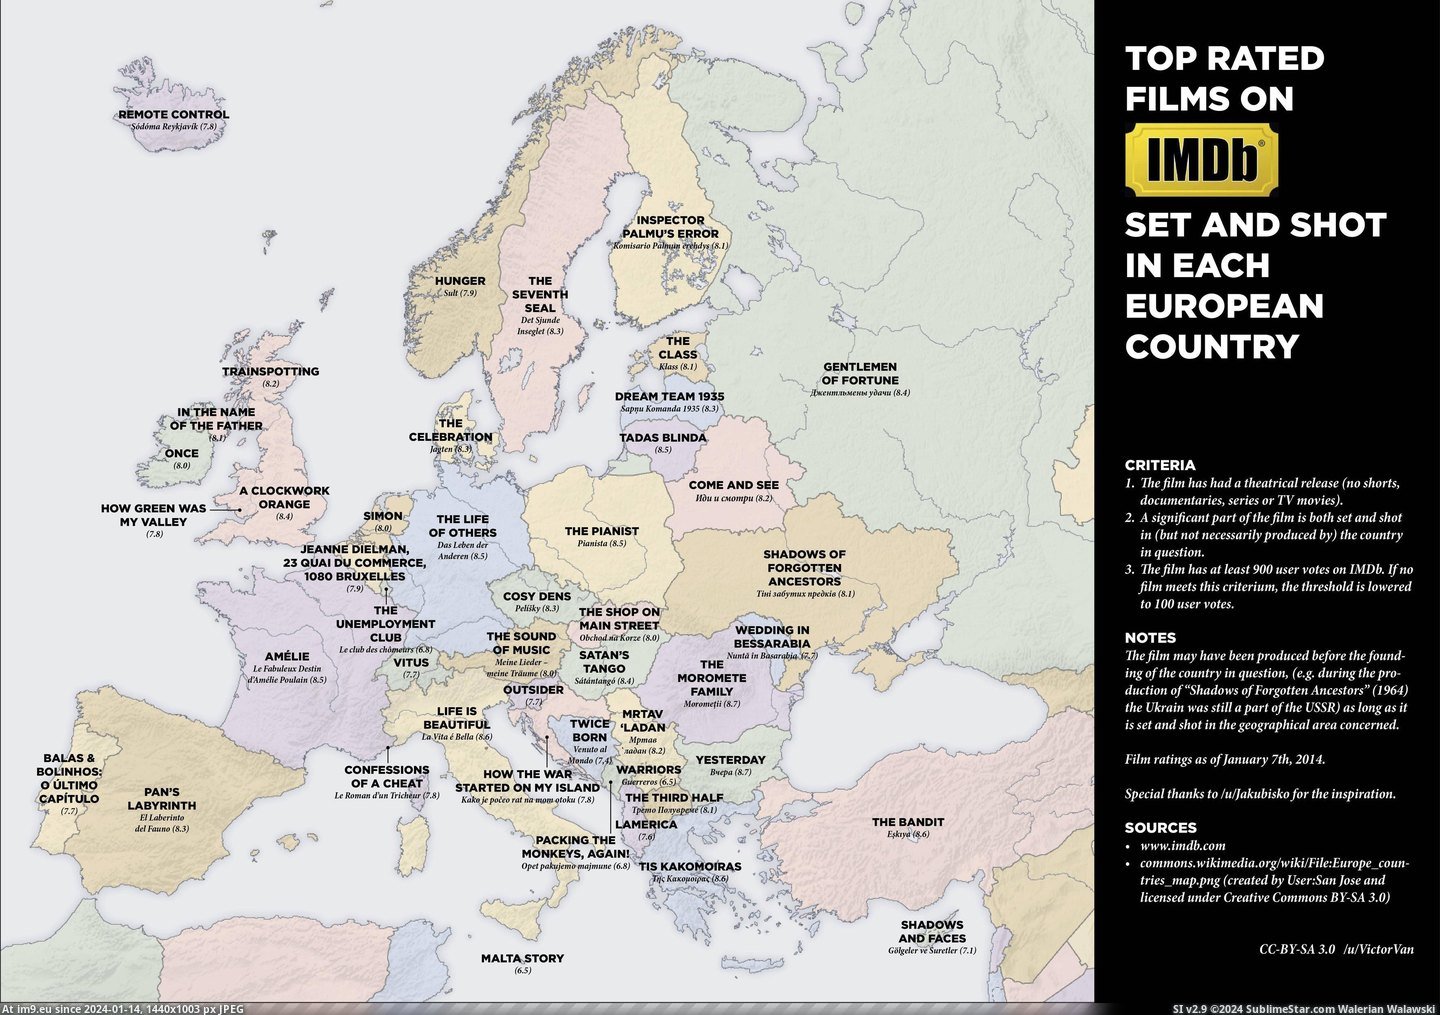 #Shot #Top #Films #Rated #Imdb #European #Country [Mapporn] Top rated films on IMDb set and shot in each European country [7087x4961] [OC] Pic. (Изображение из альбом My r/MAPS favs))